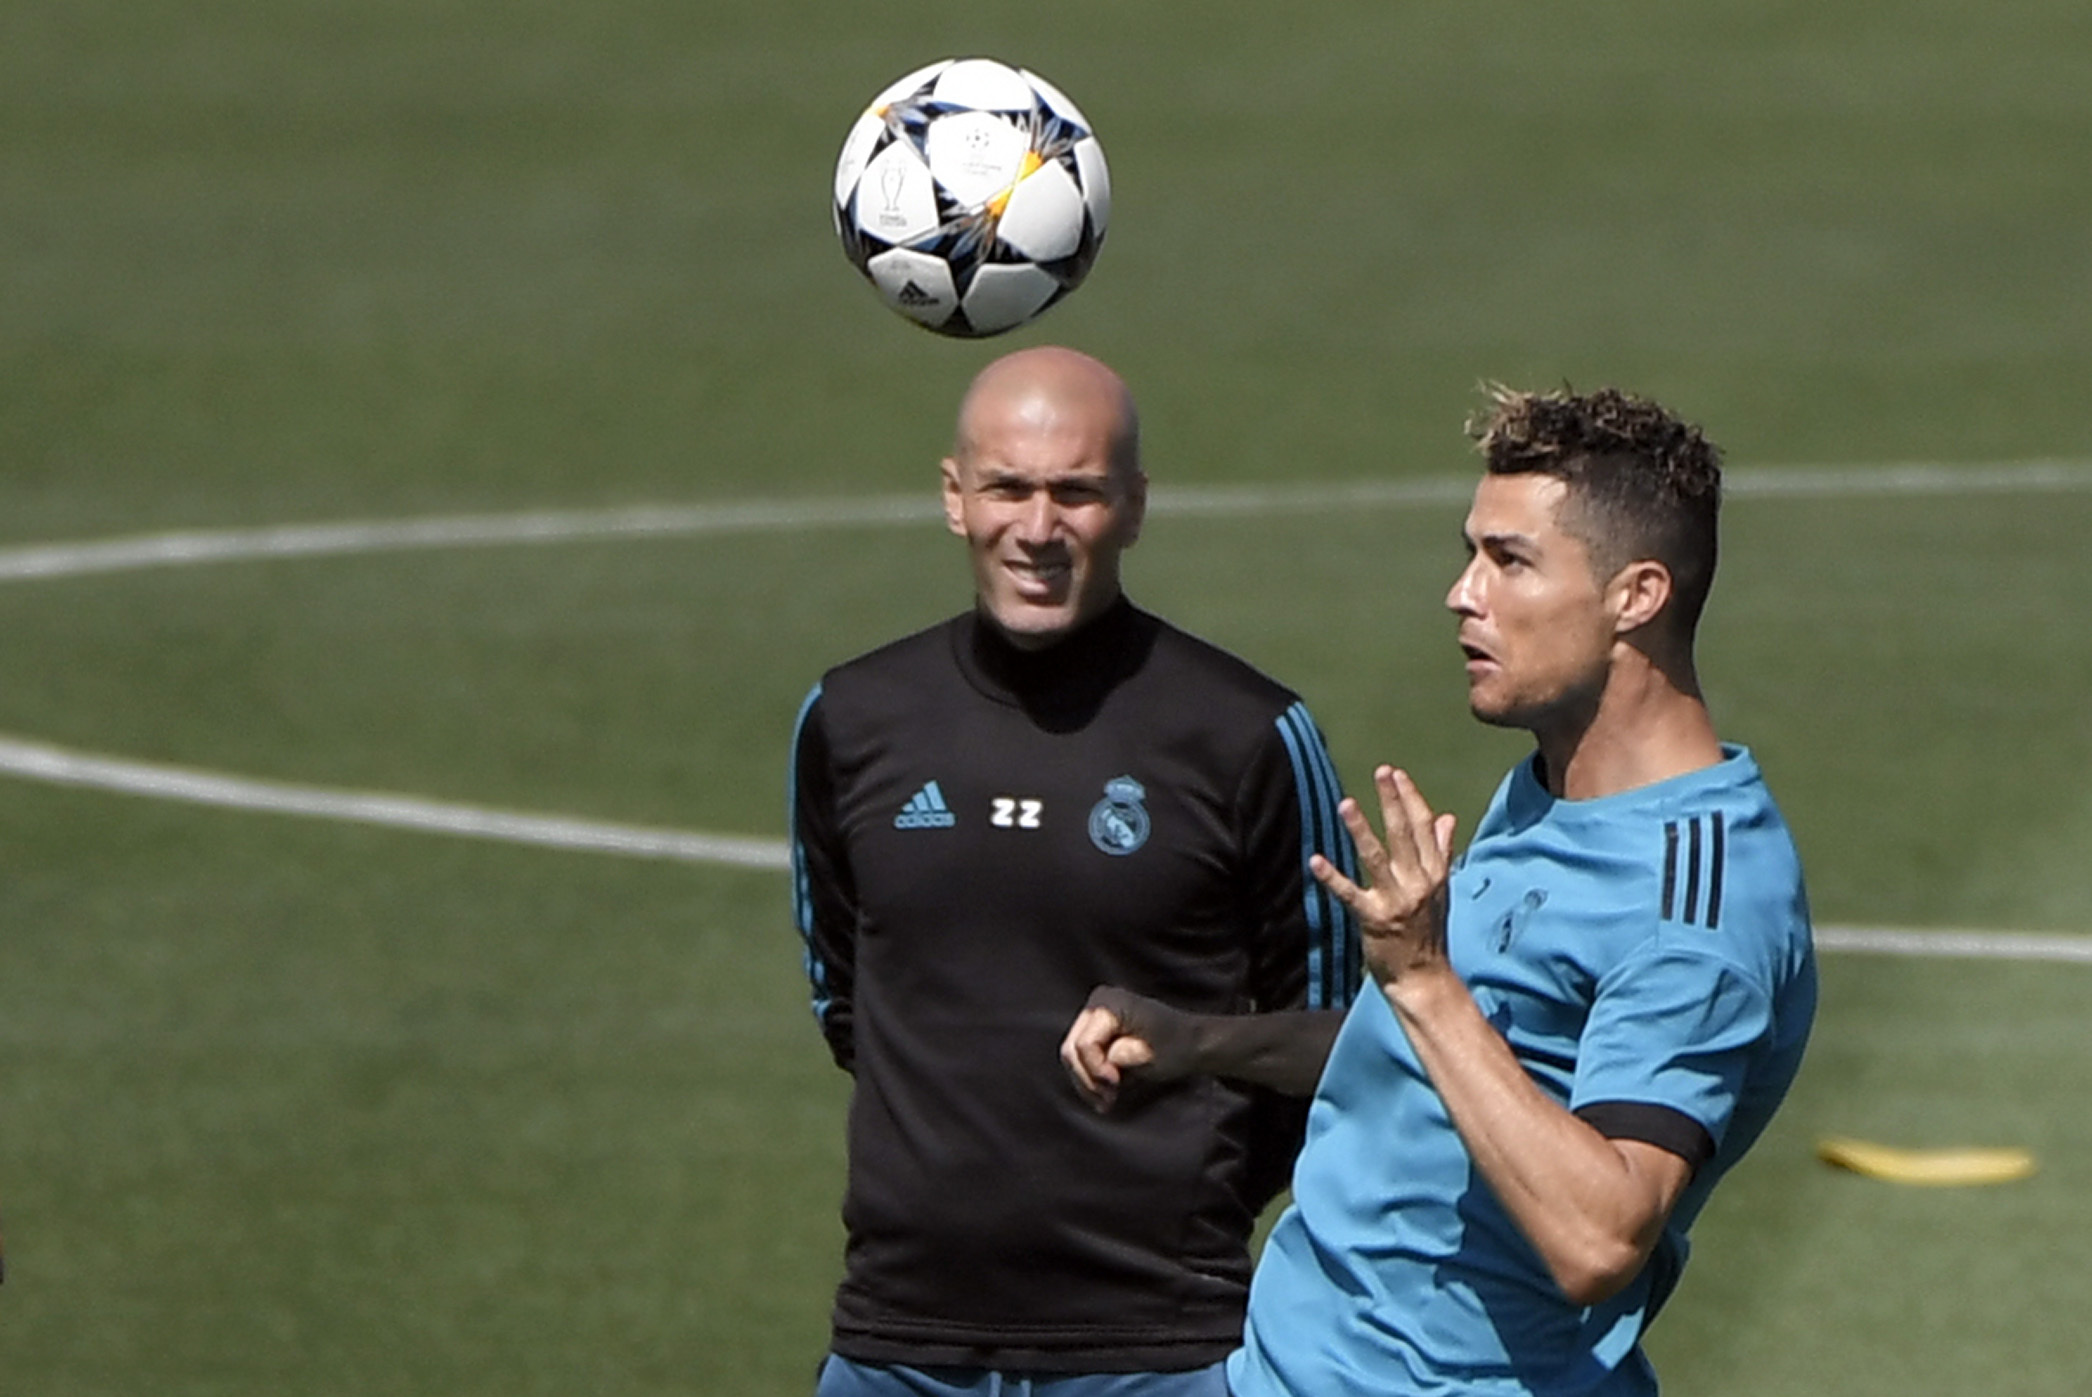 Cristiano Ronaldo is a better player than I ever was, says Real Madrid's  Zinedine Zidane ahead of Champions League final, The Independent